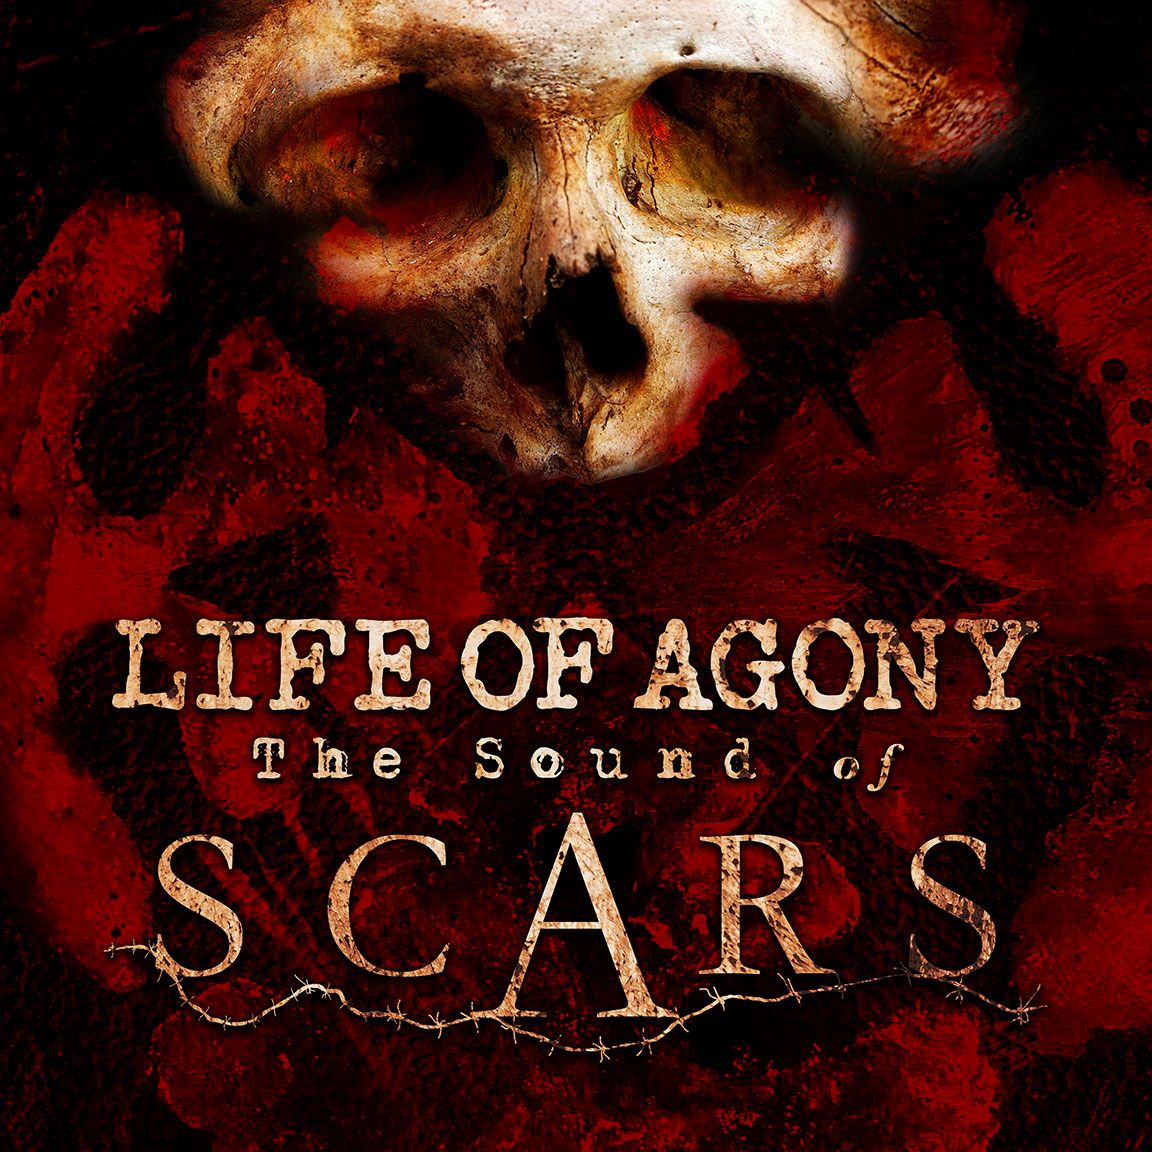 life-of-agony-the-sound-of-scars.jpg